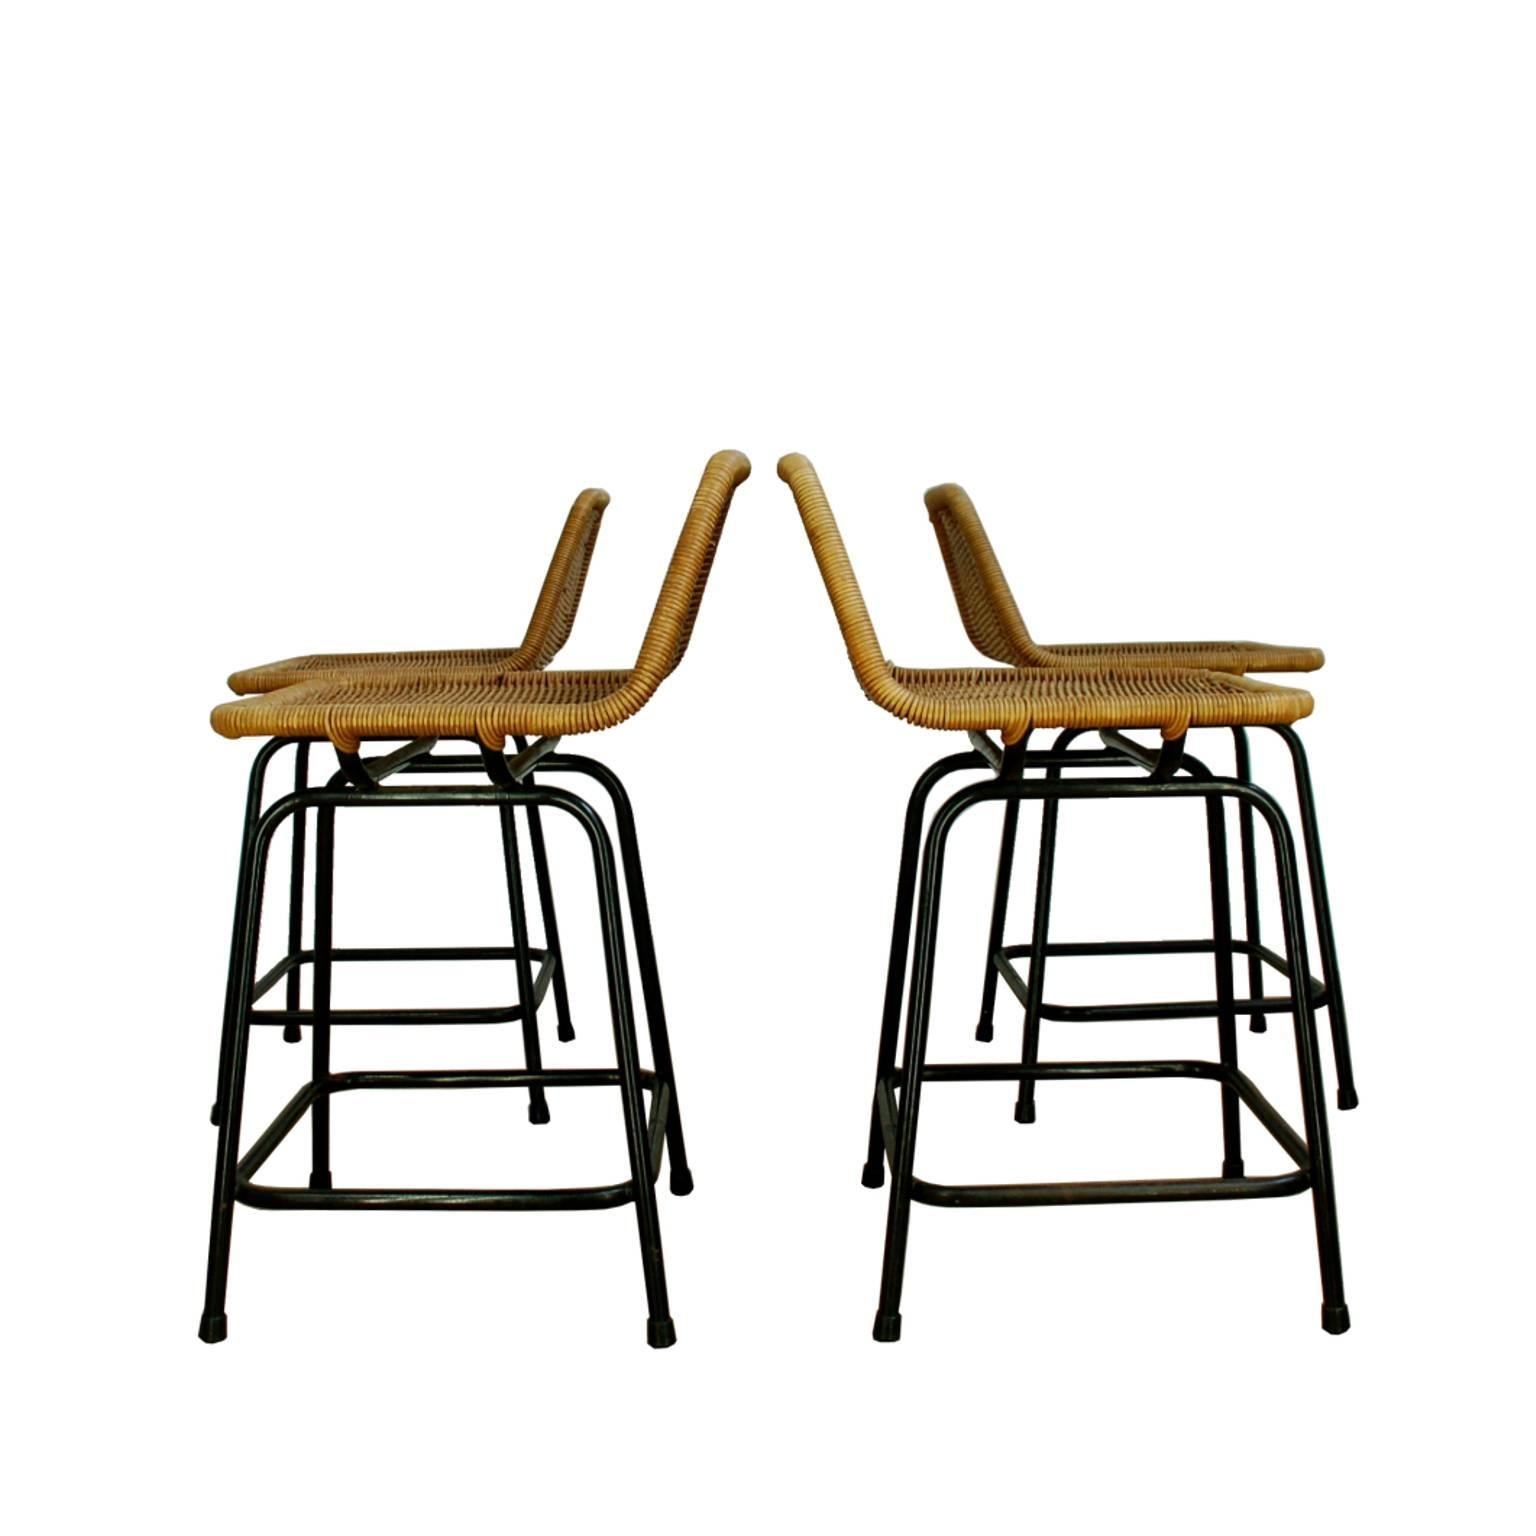 Set of four elegant stools with a black metal frame and wicker seats. They were designed in the 1960 by Dirk Van Sliedrecht and produced by Rohe Noordwolde. Please check the dimensions, these are small, chair-size stools.